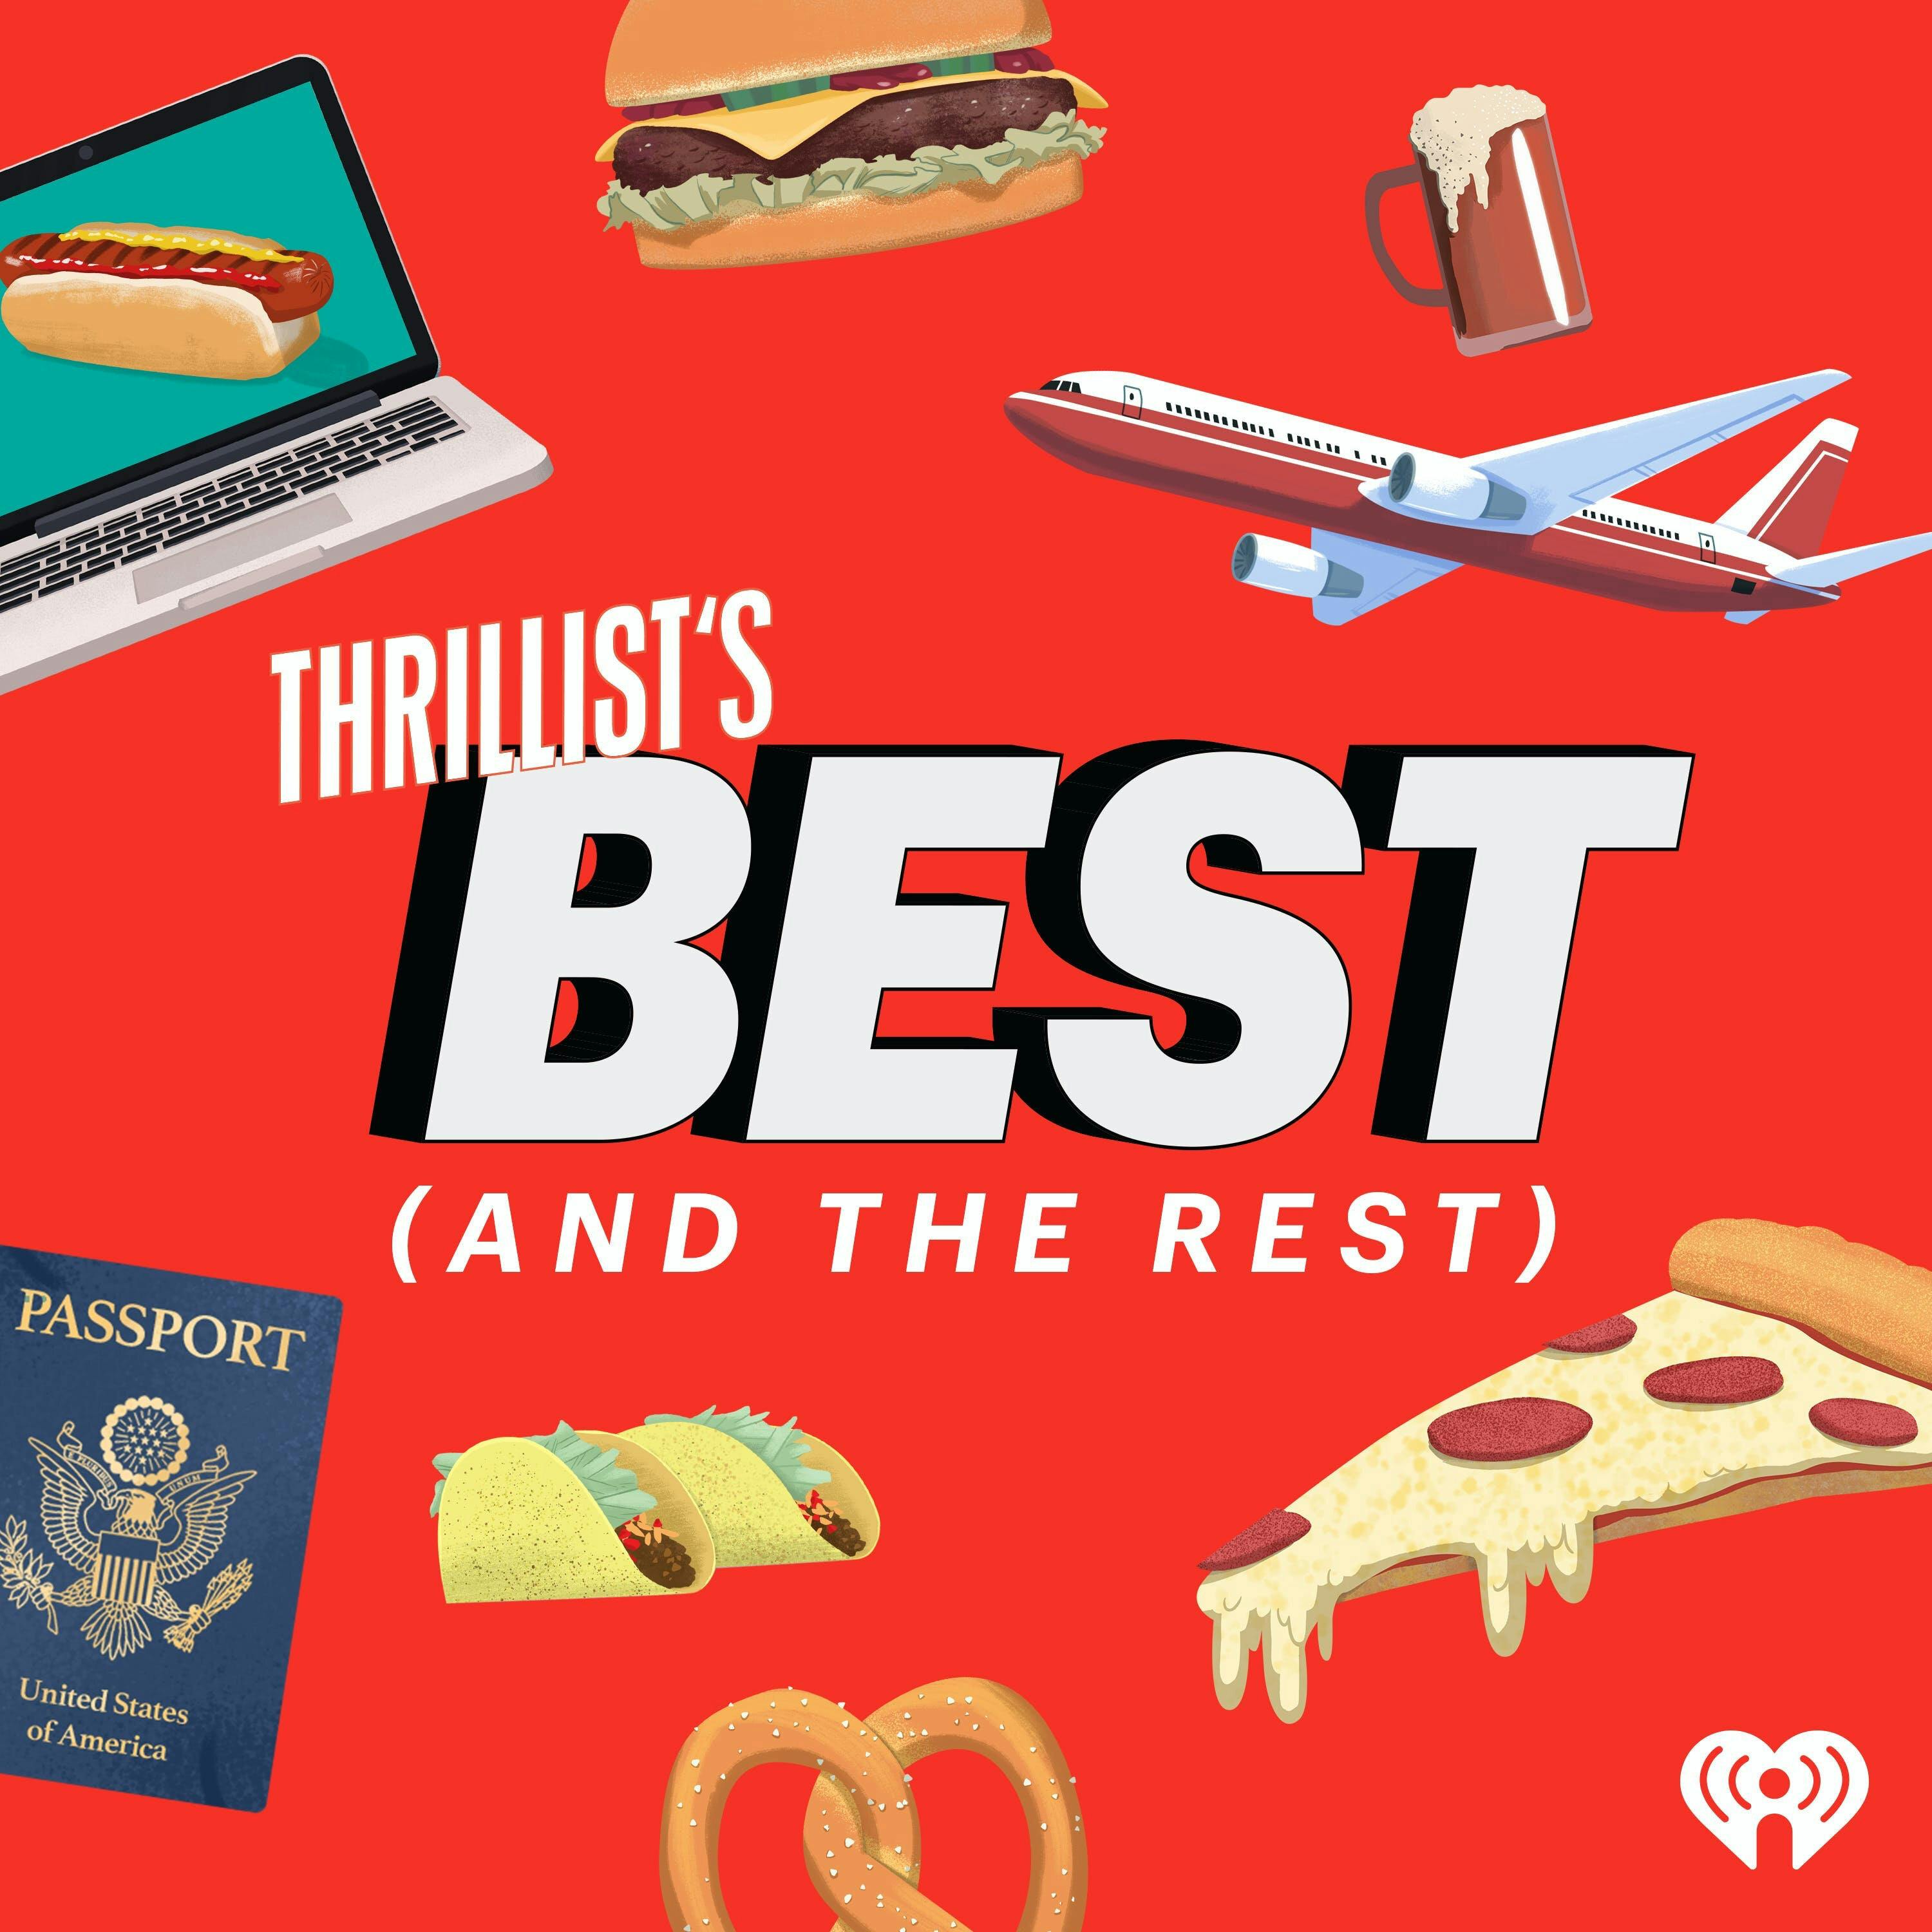 THRILLIST'S BEST: The Best Movie of the Decade is... Complicated